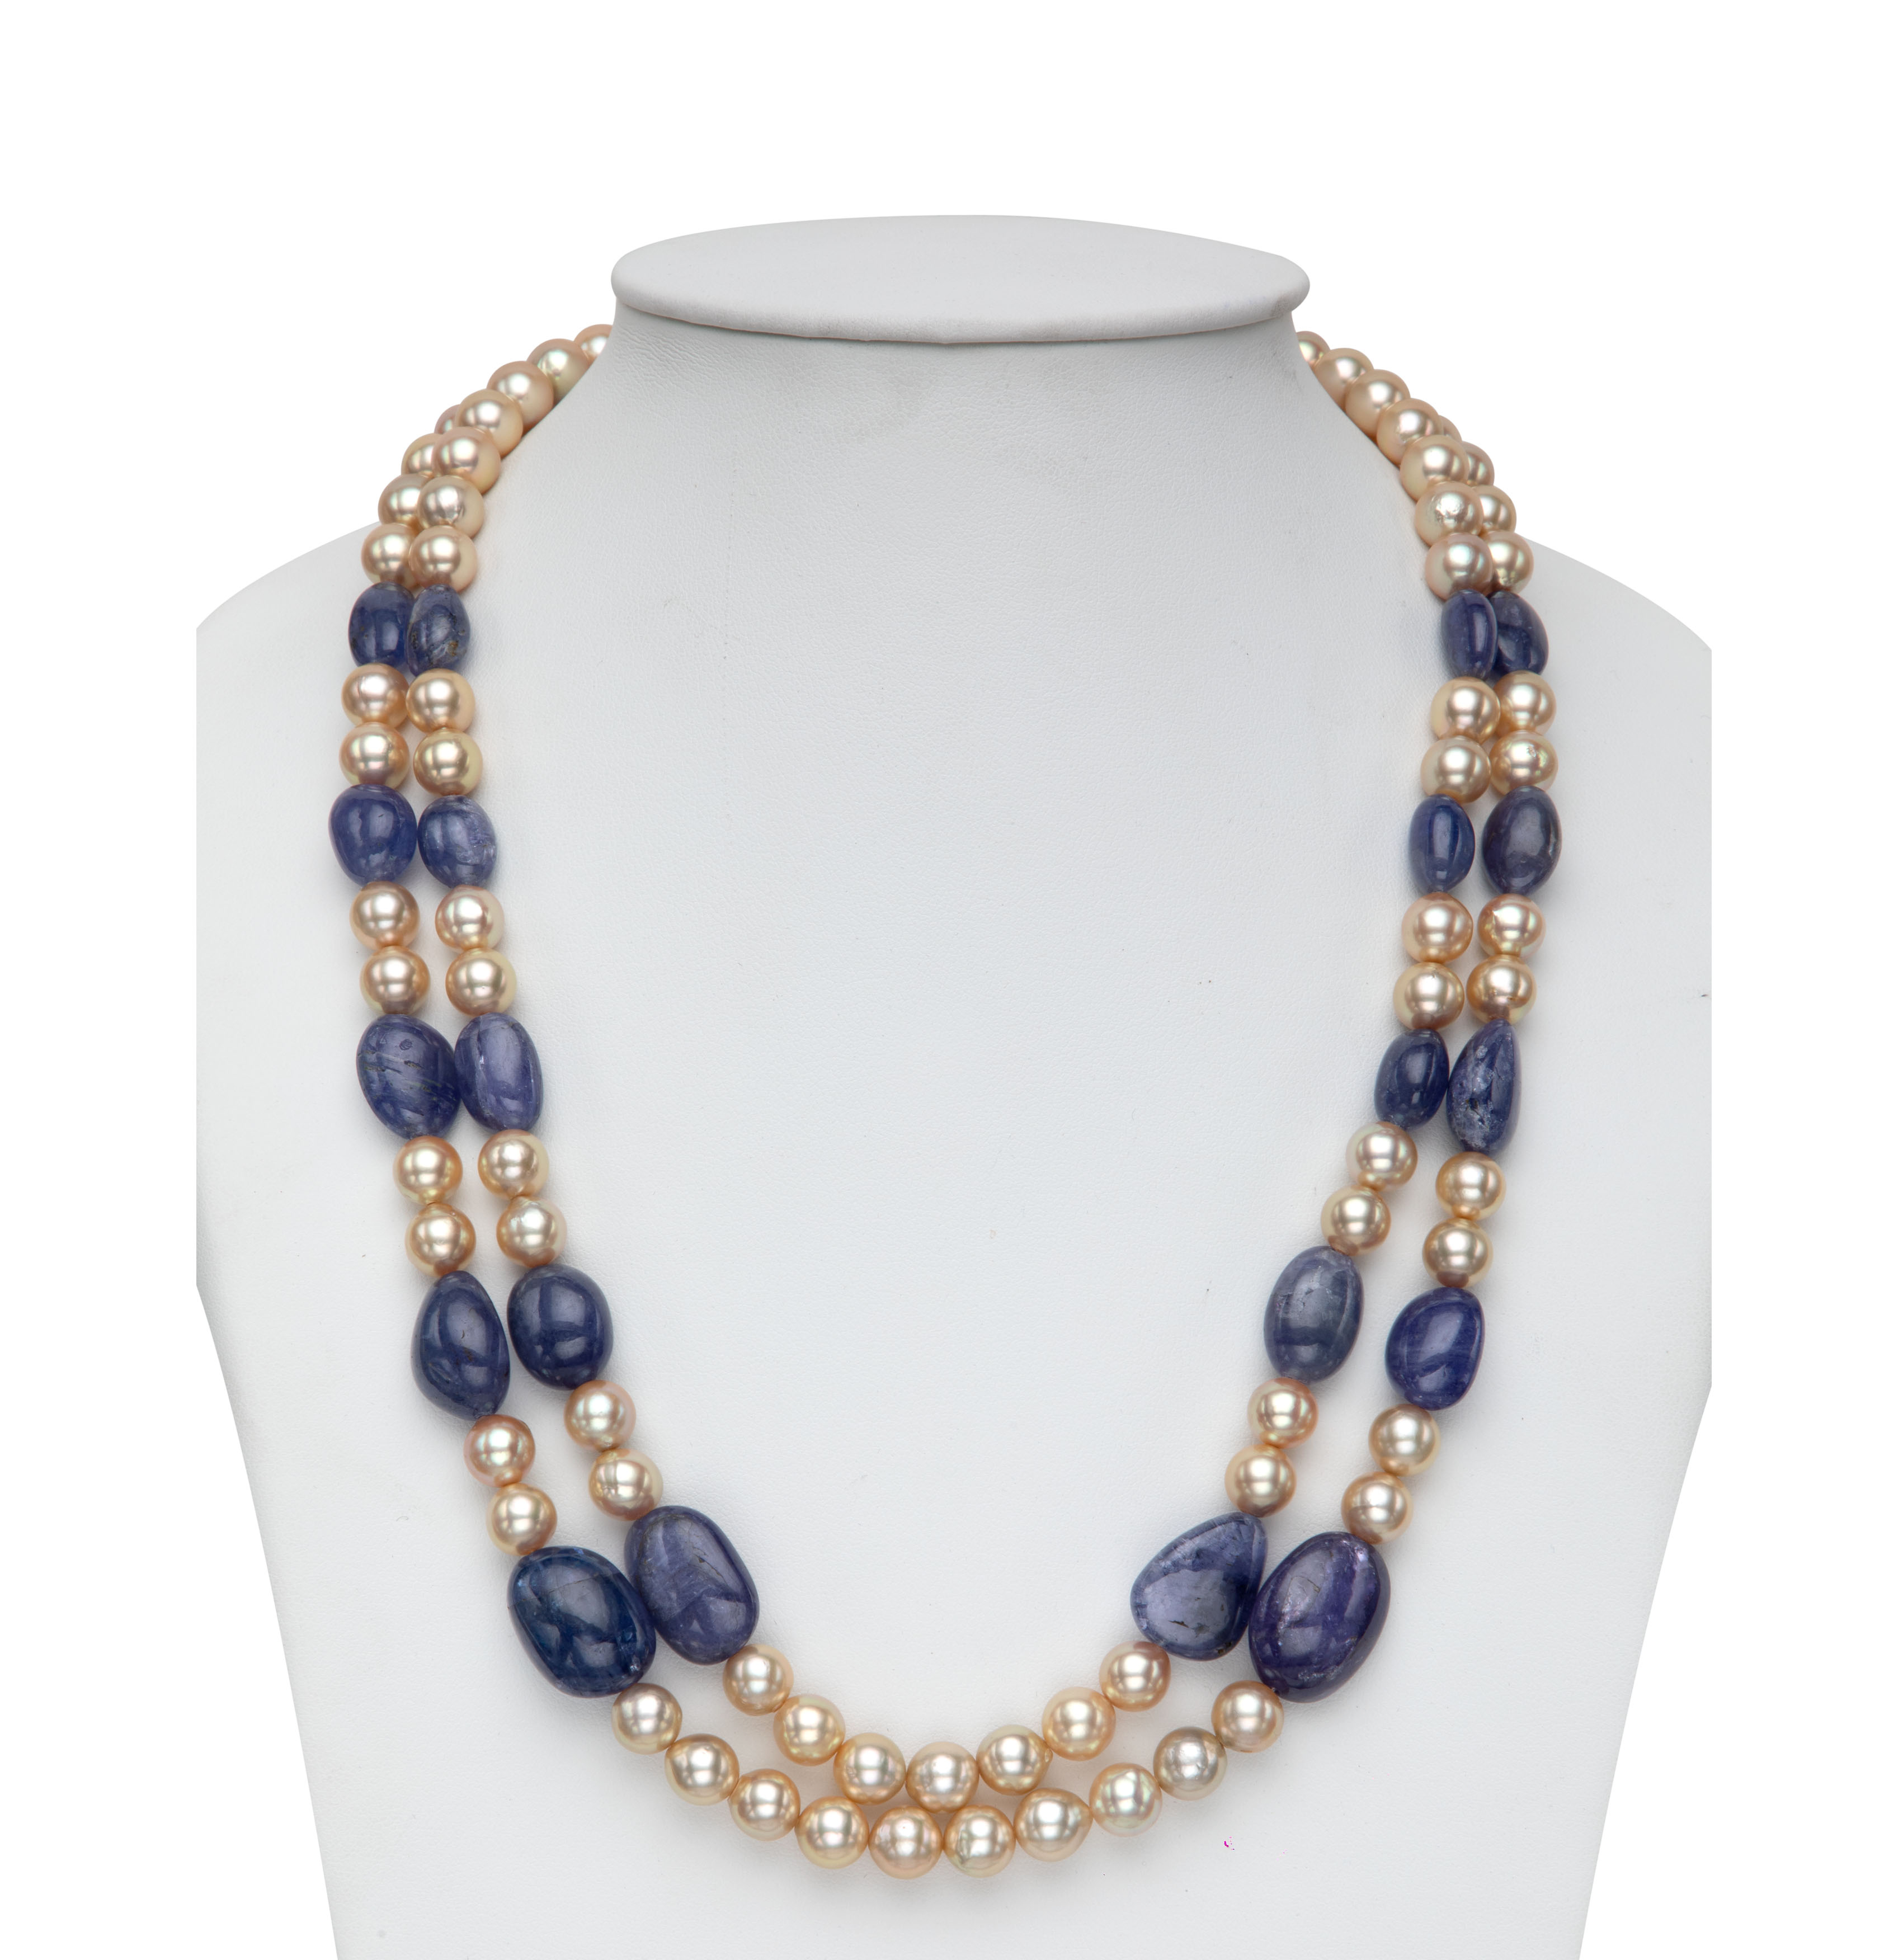 Real Tanzanite Beads and Golden Saltwater Akoya Pearls Necklace Set Mangatrai Pearls & Jewellers